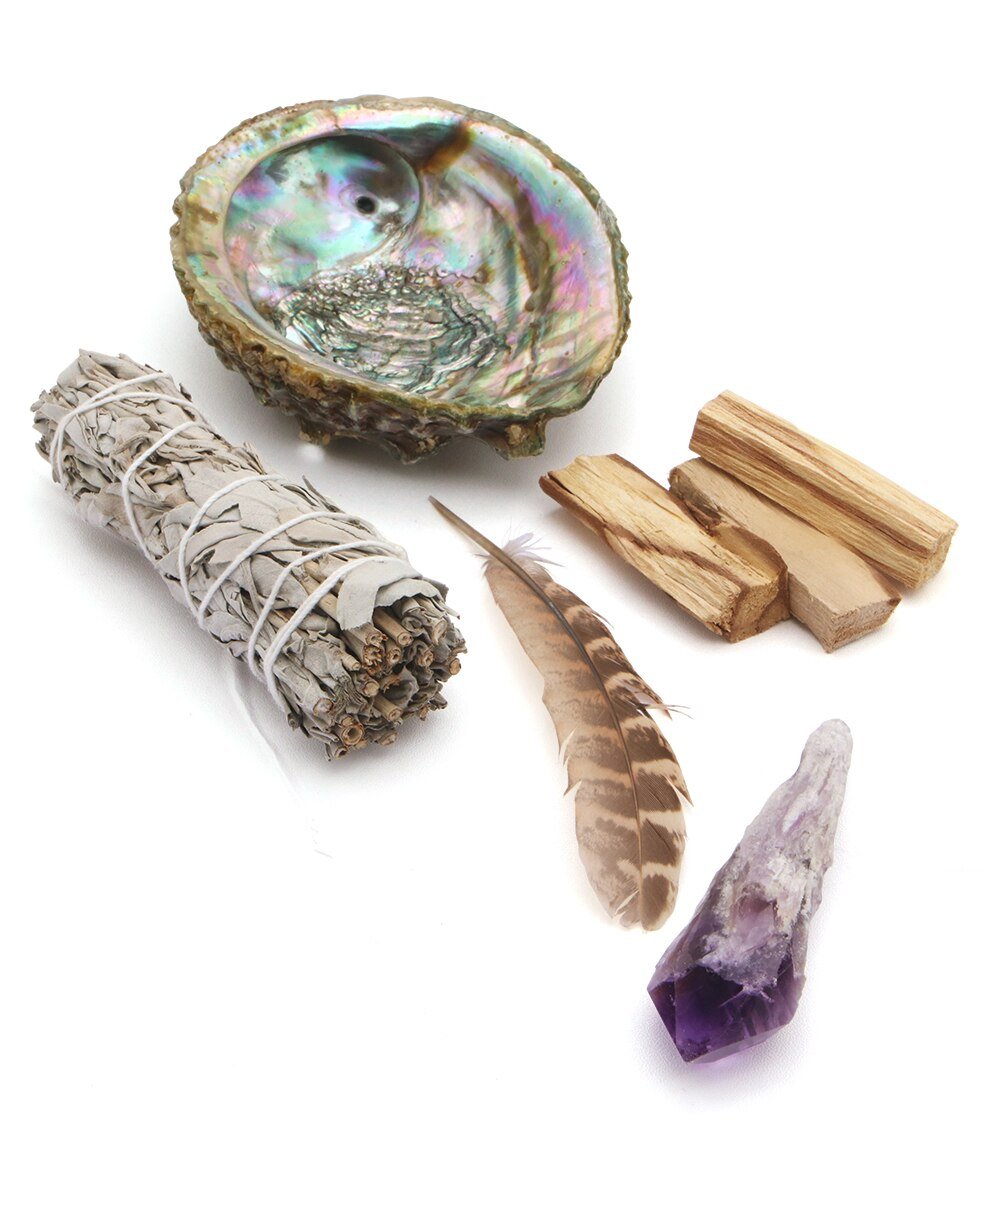 Healing and Purifying Smudge Kit with Amethyst - Spiritual Practice